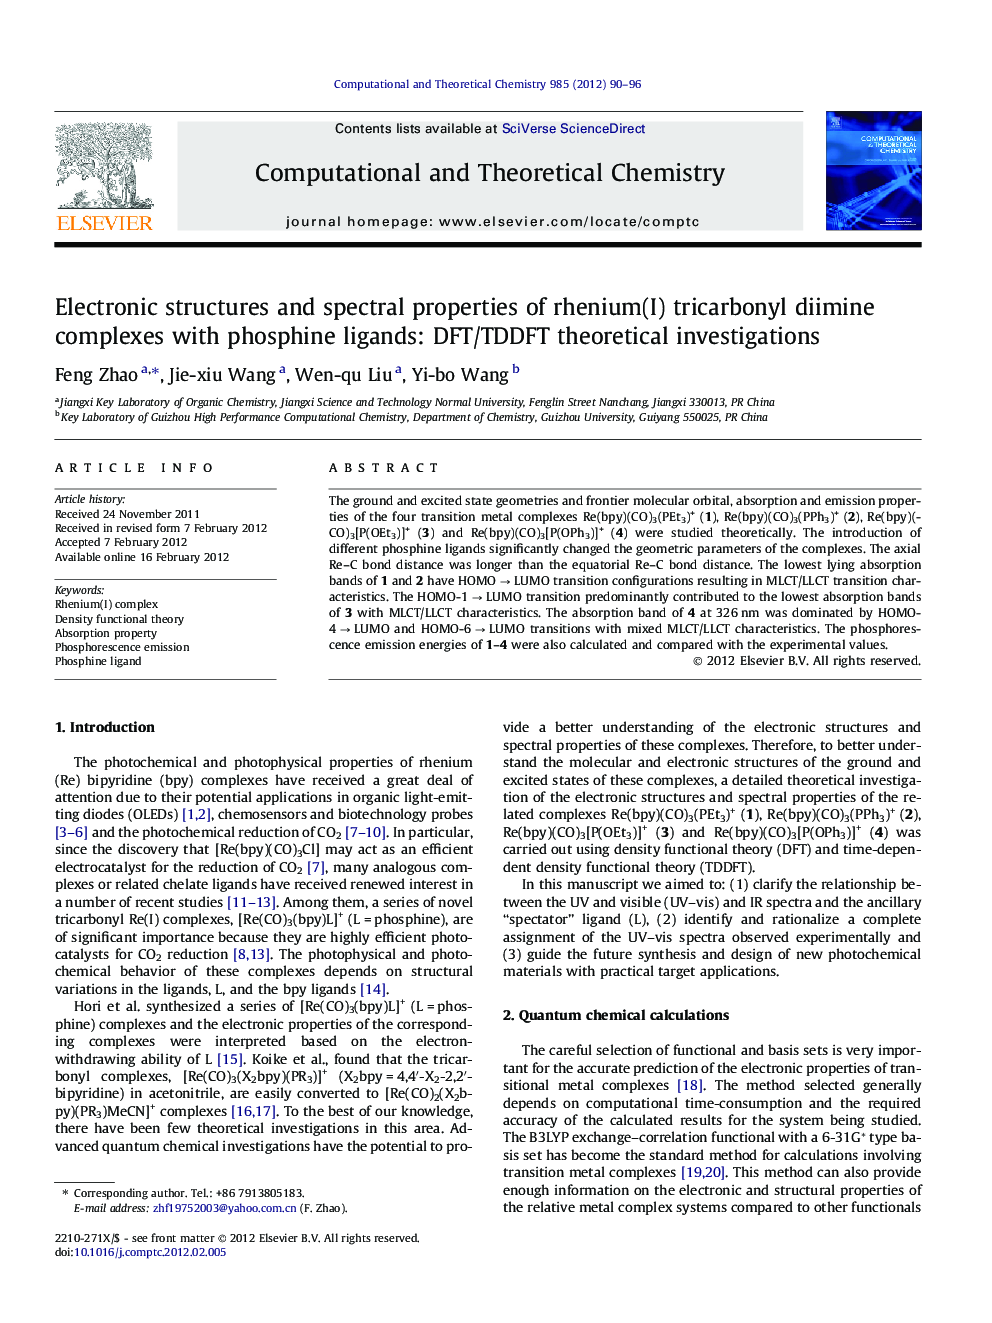 Electronic structures and spectral properties of rhenium(I) tricarbonyl diimine complexes with phosphine ligands: DFT/TDDFT theoretical investigations